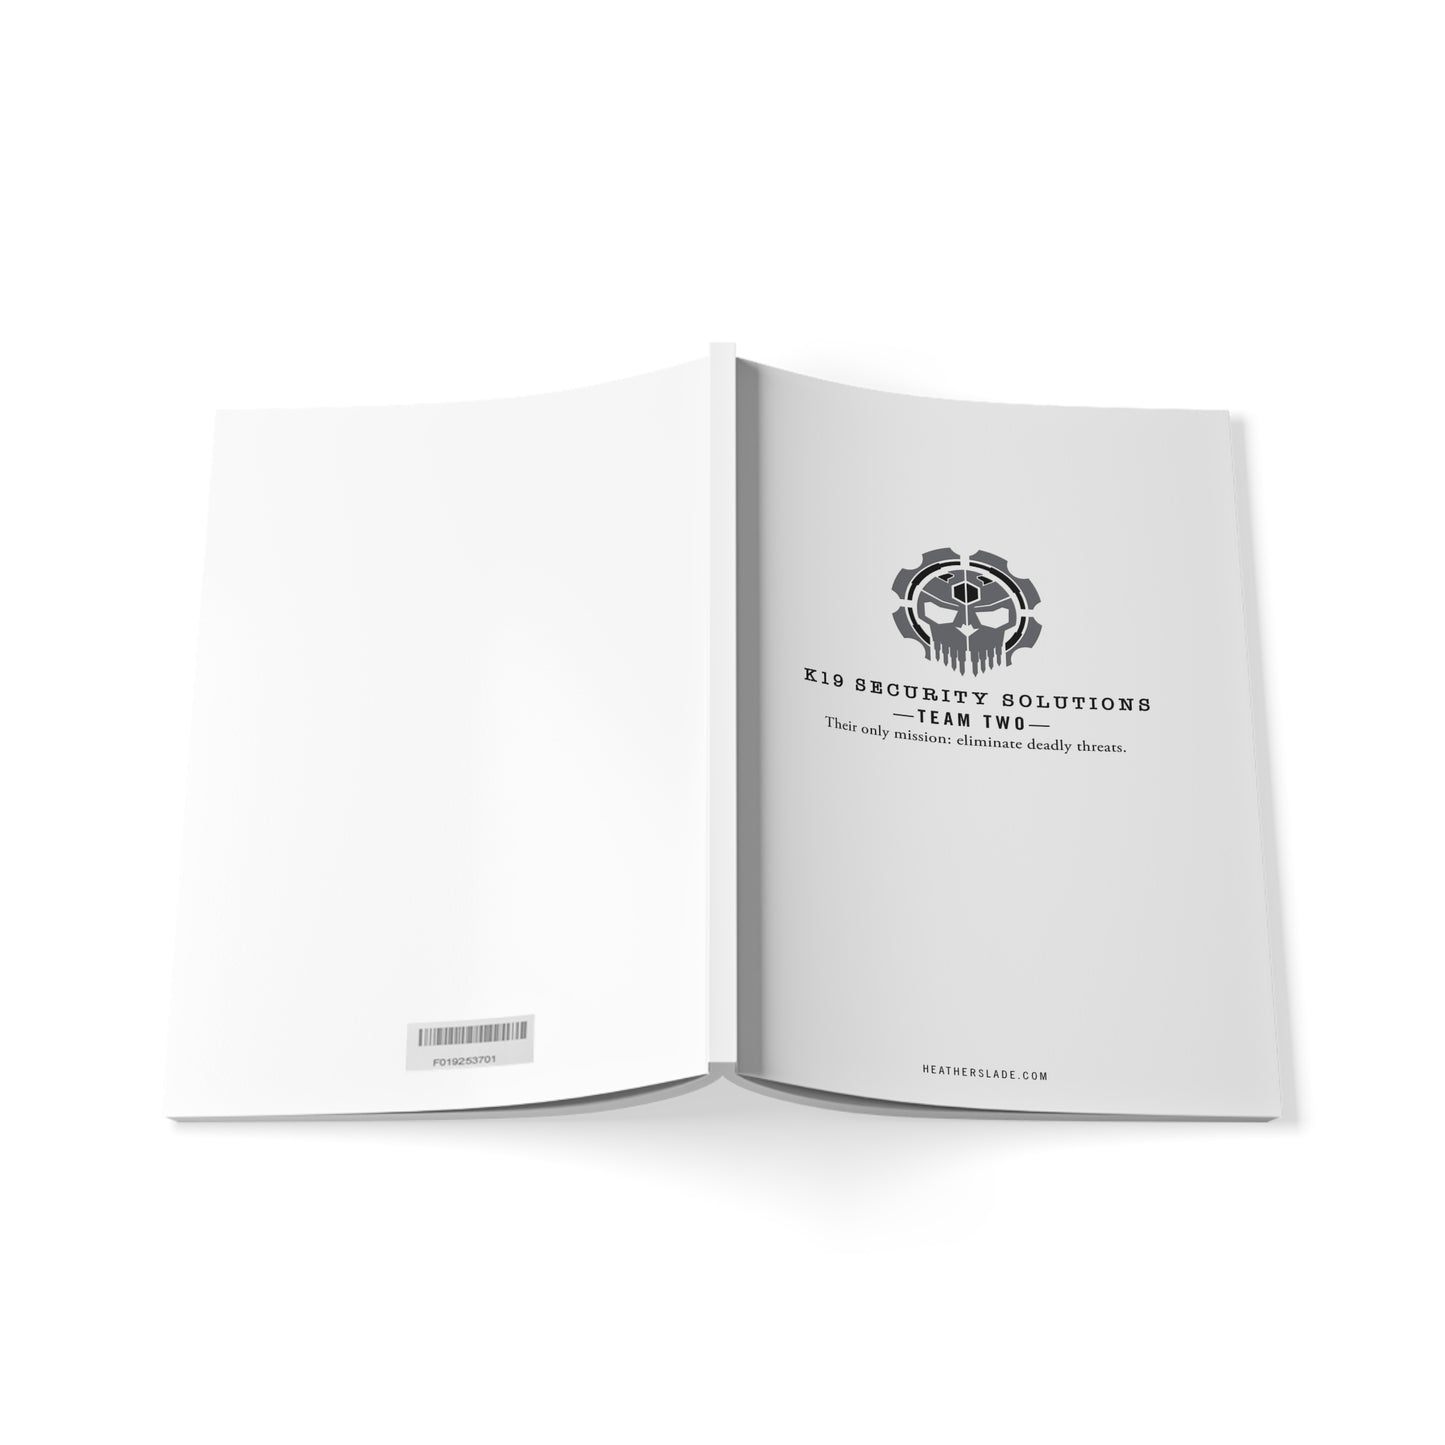 K19 Security Solutions Team Two Softcover Notebook